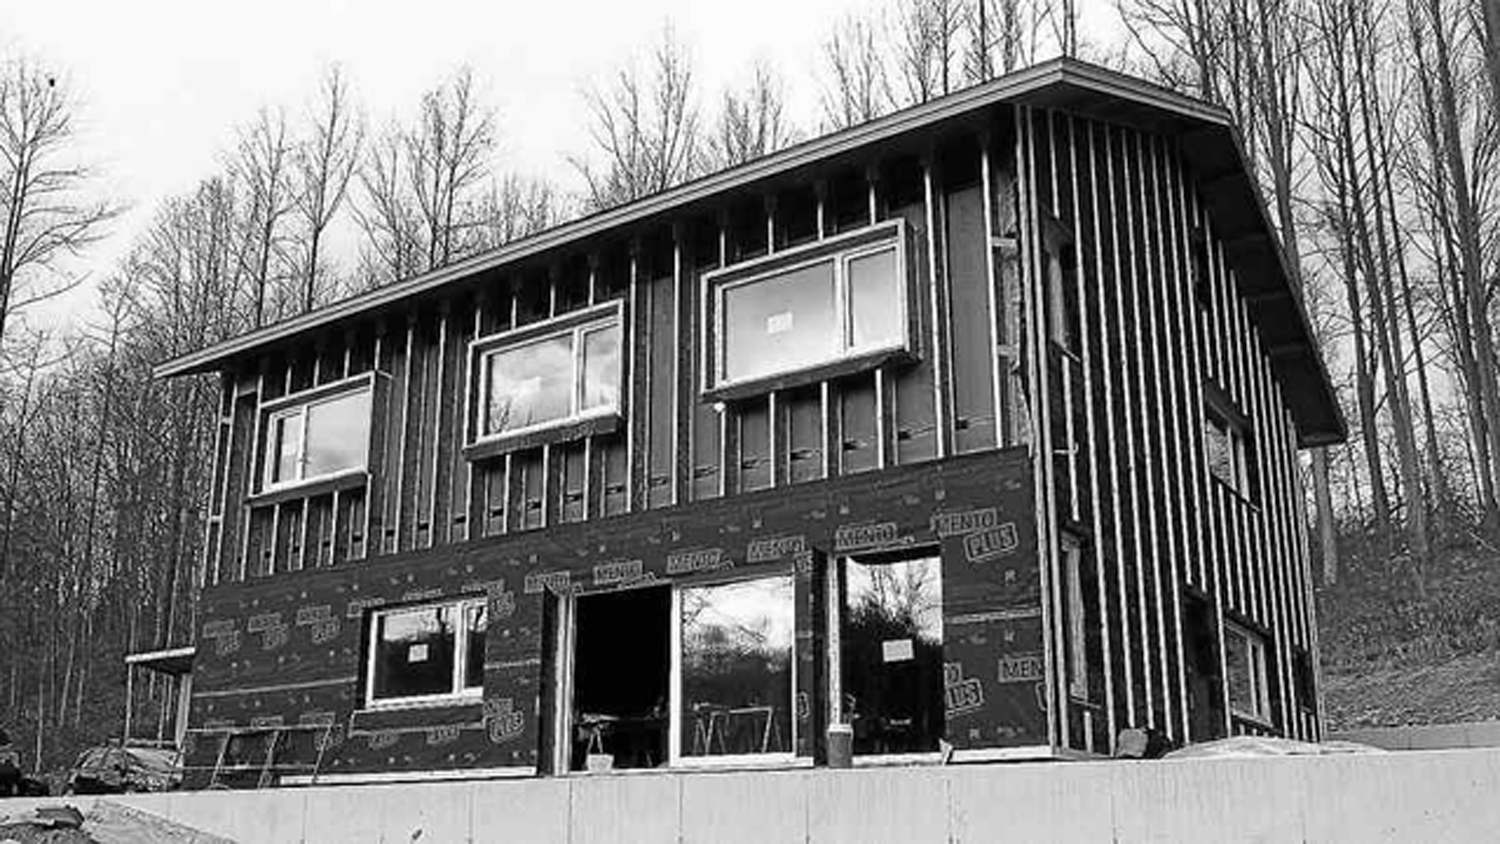 Construction of Passive House in Washington Twp. is a First in Berks